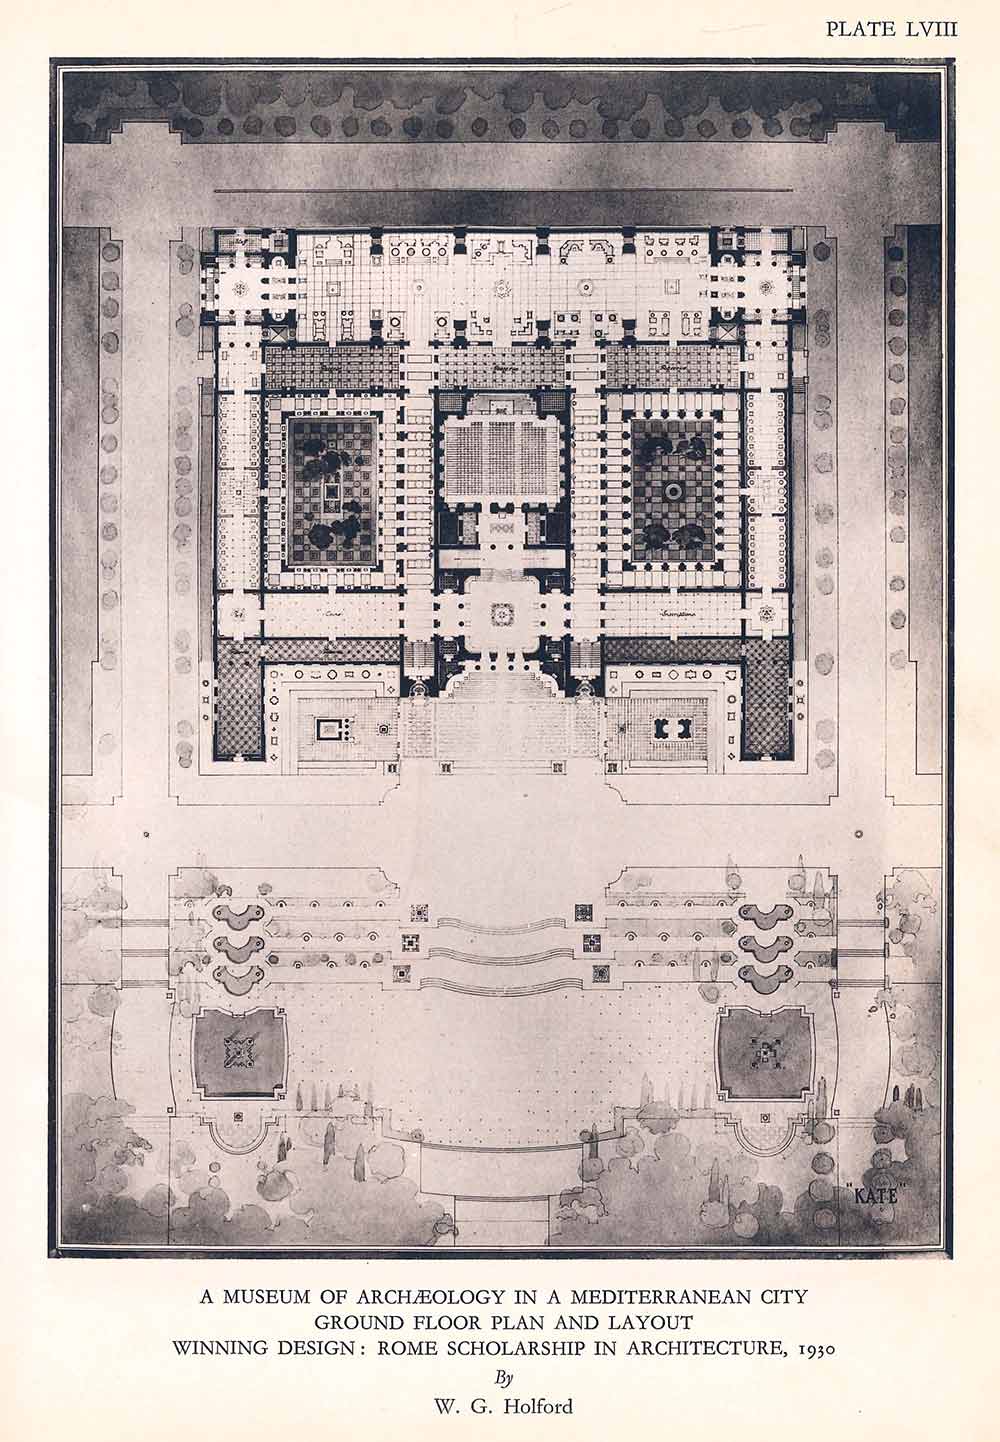 A Museum of Archaeology in a Mediterranean City, Ground Floor Plan. Published in the Book of the Liverpool School of Architecture, The University Press of Liverpool and Hodder and Stoughton Ltd London, 1932. Plate LVIII.